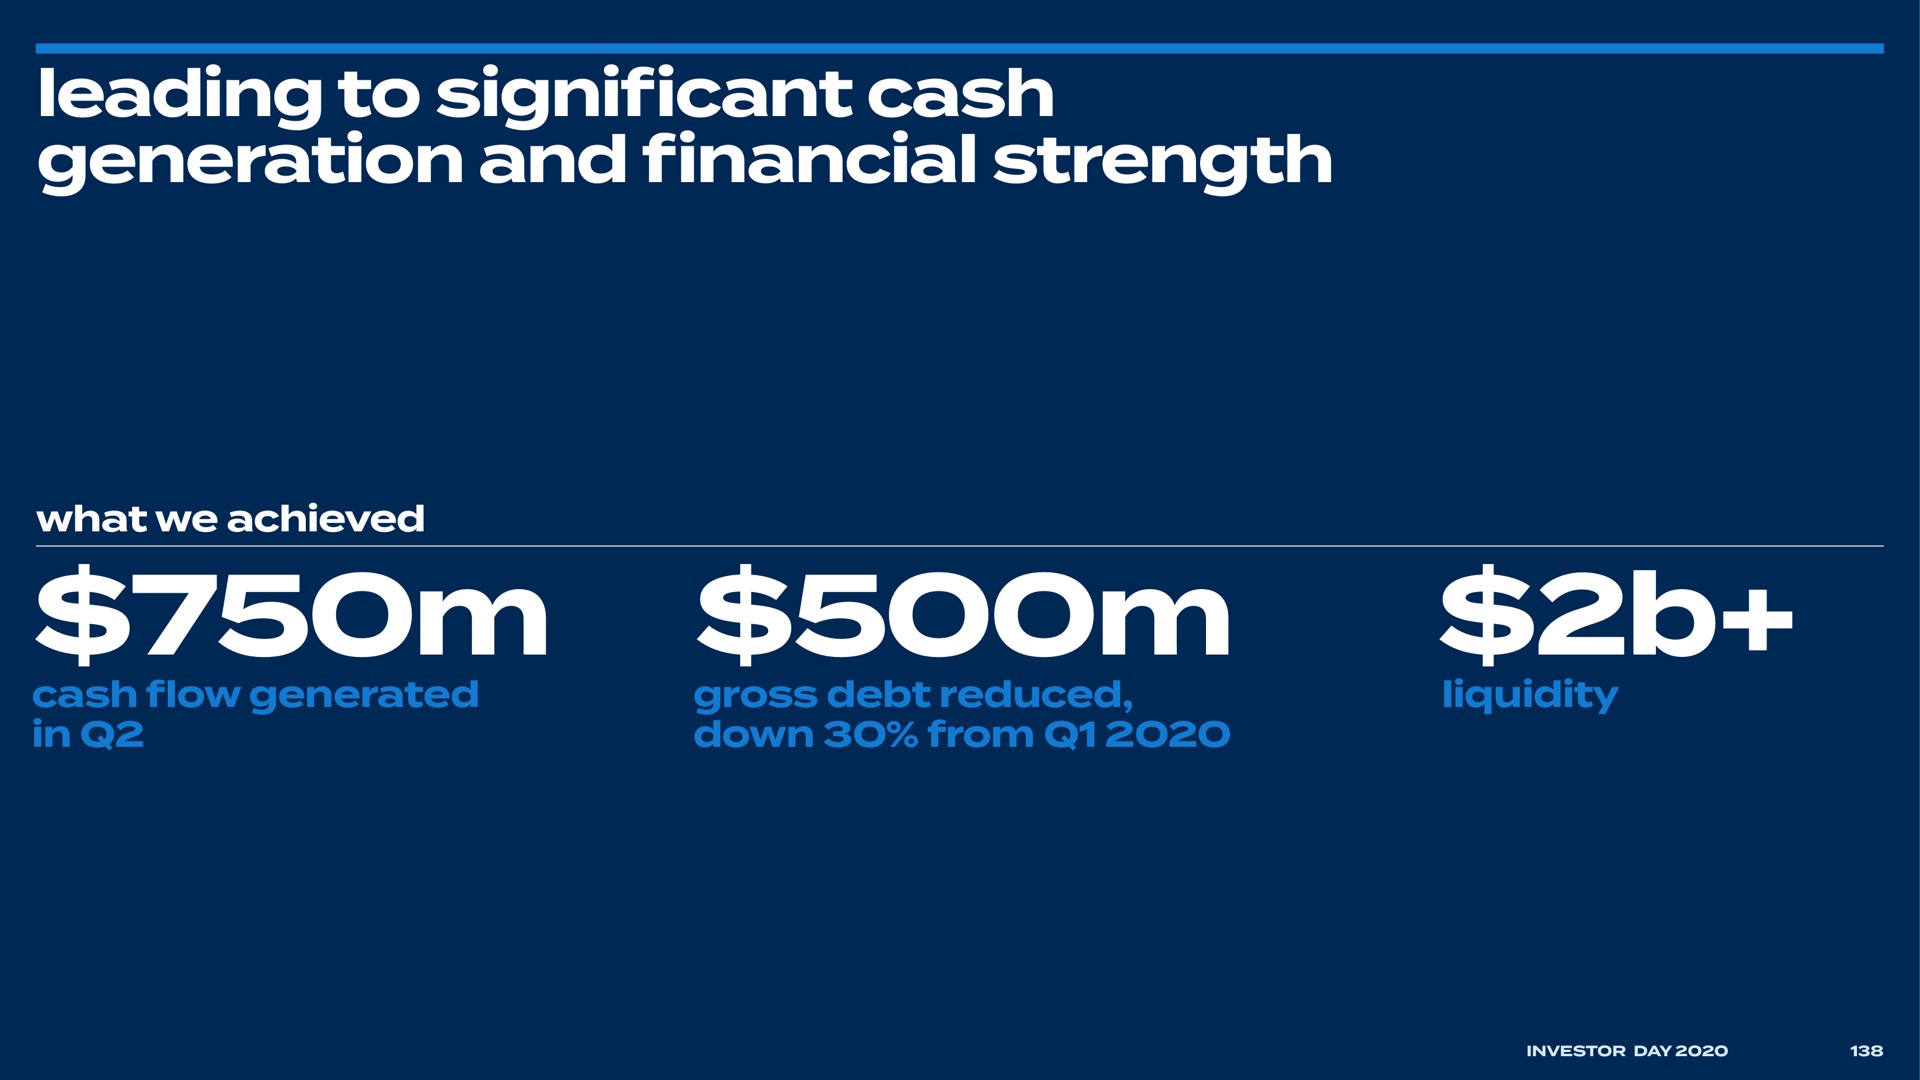 leading to cant cash generation and strength significant financial | Bed Bath & Beyond